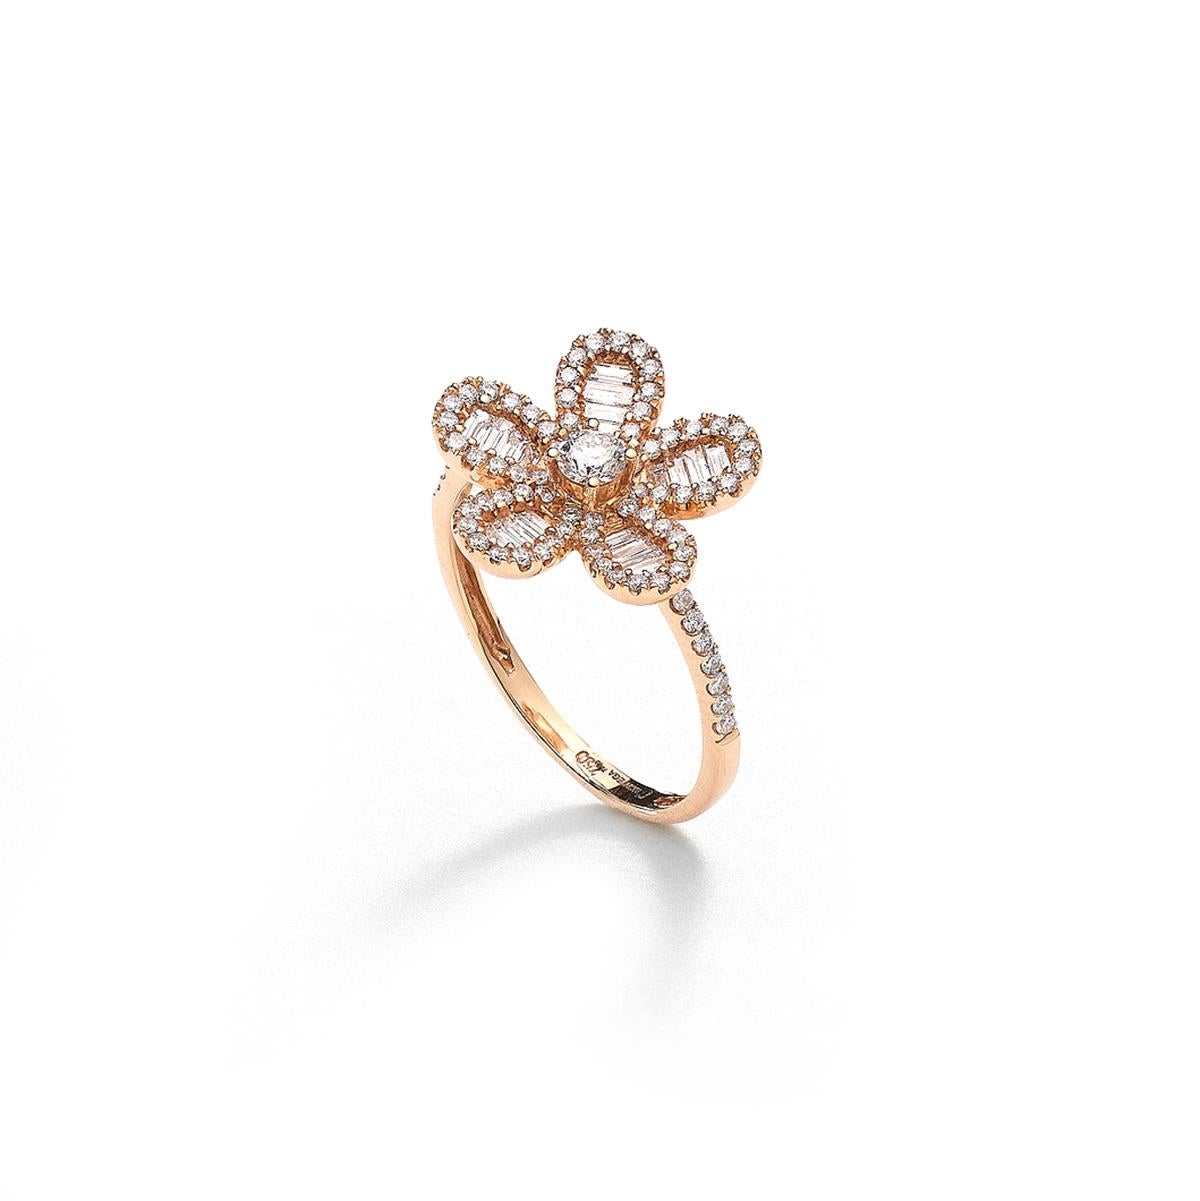 Flower ring in 18kt pink gold set with 80 diamonds 0.44 cts and 20 baguette cut diamonds 0.24 cts Size 52